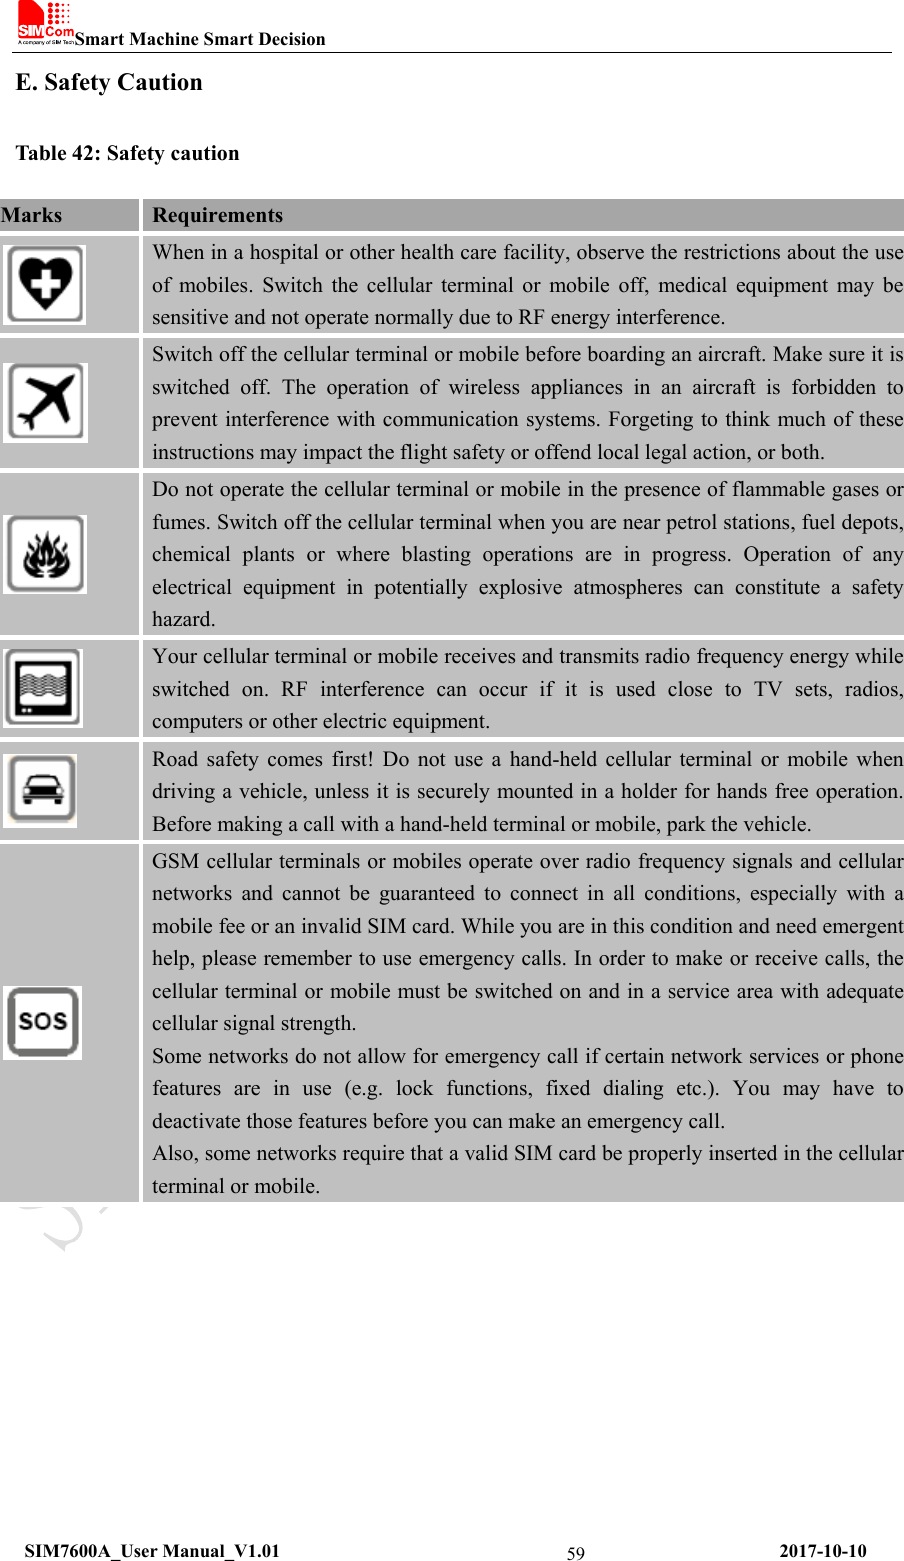 Smart Machine Smart Decision  SIM7600A_User Manual_V1.01                                                     2017-10-10 59E. Safety Caution Table 42: Safety caution Marks  Requirements  When in a hospital or other health care facility, observe the restrictions about the use of mobiles. Switch the cellular terminal or mobile off, medical equipment may be sensitive and not operate normally due to RF energy interference.  Switch off the cellular terminal or mobile before boarding an aircraft. Make sure it is switched off. The operation of wireless appliances in an aircraft is forbidden to prevent interference with communication systems. Forgeting to think much of these instructions may impact the flight safety or offend local legal action, or both.  Do not operate the cellular terminal or mobile in the presence of flammable gases or fumes. Switch off the cellular terminal when you are near petrol stations, fuel depots, chemical plants or where blasting operations are in progress. Operation of any electrical equipment in potentially explosive atmospheres can constitute a safety hazard.  Your cellular terminal or mobile receives and transmits radio frequency energy while switched on. RF interference can occur if it is used close to TV sets, radios, computers or other electric equipment.  Road safety comes first! Do not use a hand-held cellular terminal or mobile when driving a vehicle, unless it is securely mounted in a holder for hands free operation. Before making a call with a hand-held terminal or mobile, park the vehicle.  GSM cellular terminals or mobiles operate over radio frequency signals and cellular networks and cannot be guaranteed to connect in all conditions, especially with a mobile fee or an invalid SIM card. While you are in this condition and need emergent help, please remember to use emergency calls. In order to make or receive calls, the cellular terminal or mobile must be switched on and in a service area with adequate cellular signal strength. Some networks do not allow for emergency call if certain network services or phone features are in use (e.g. lock functions, fixed dialing etc.). You may have to deactivate those features before you can make an emergency call. Also, some networks require that a valid SIM card be properly inserted in the cellular terminal or mobile. 